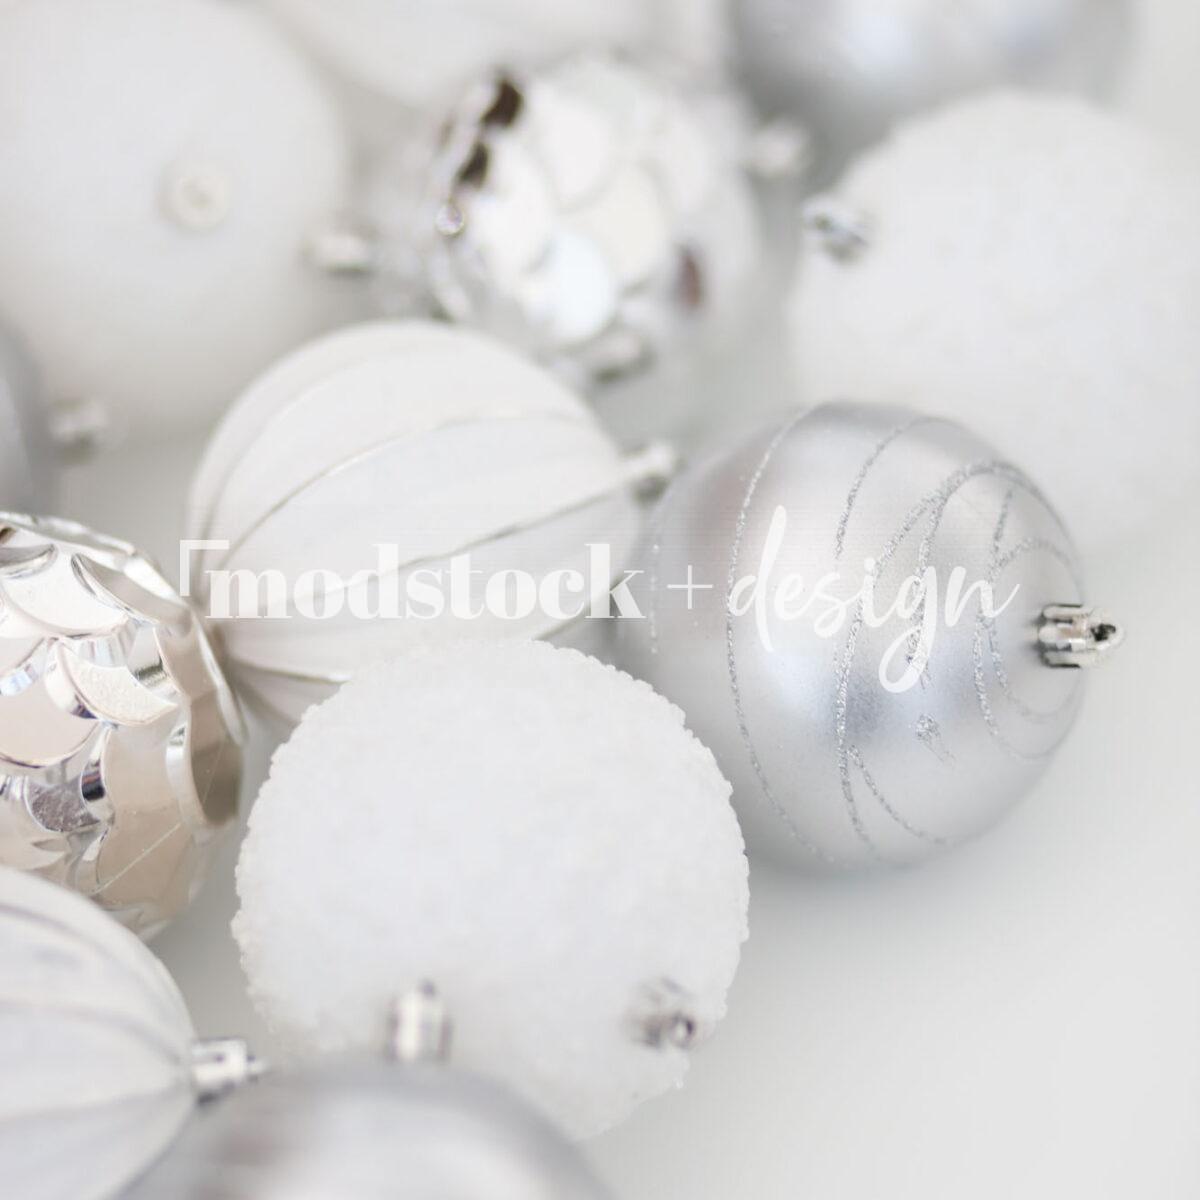 Ornaments and Baubles 46